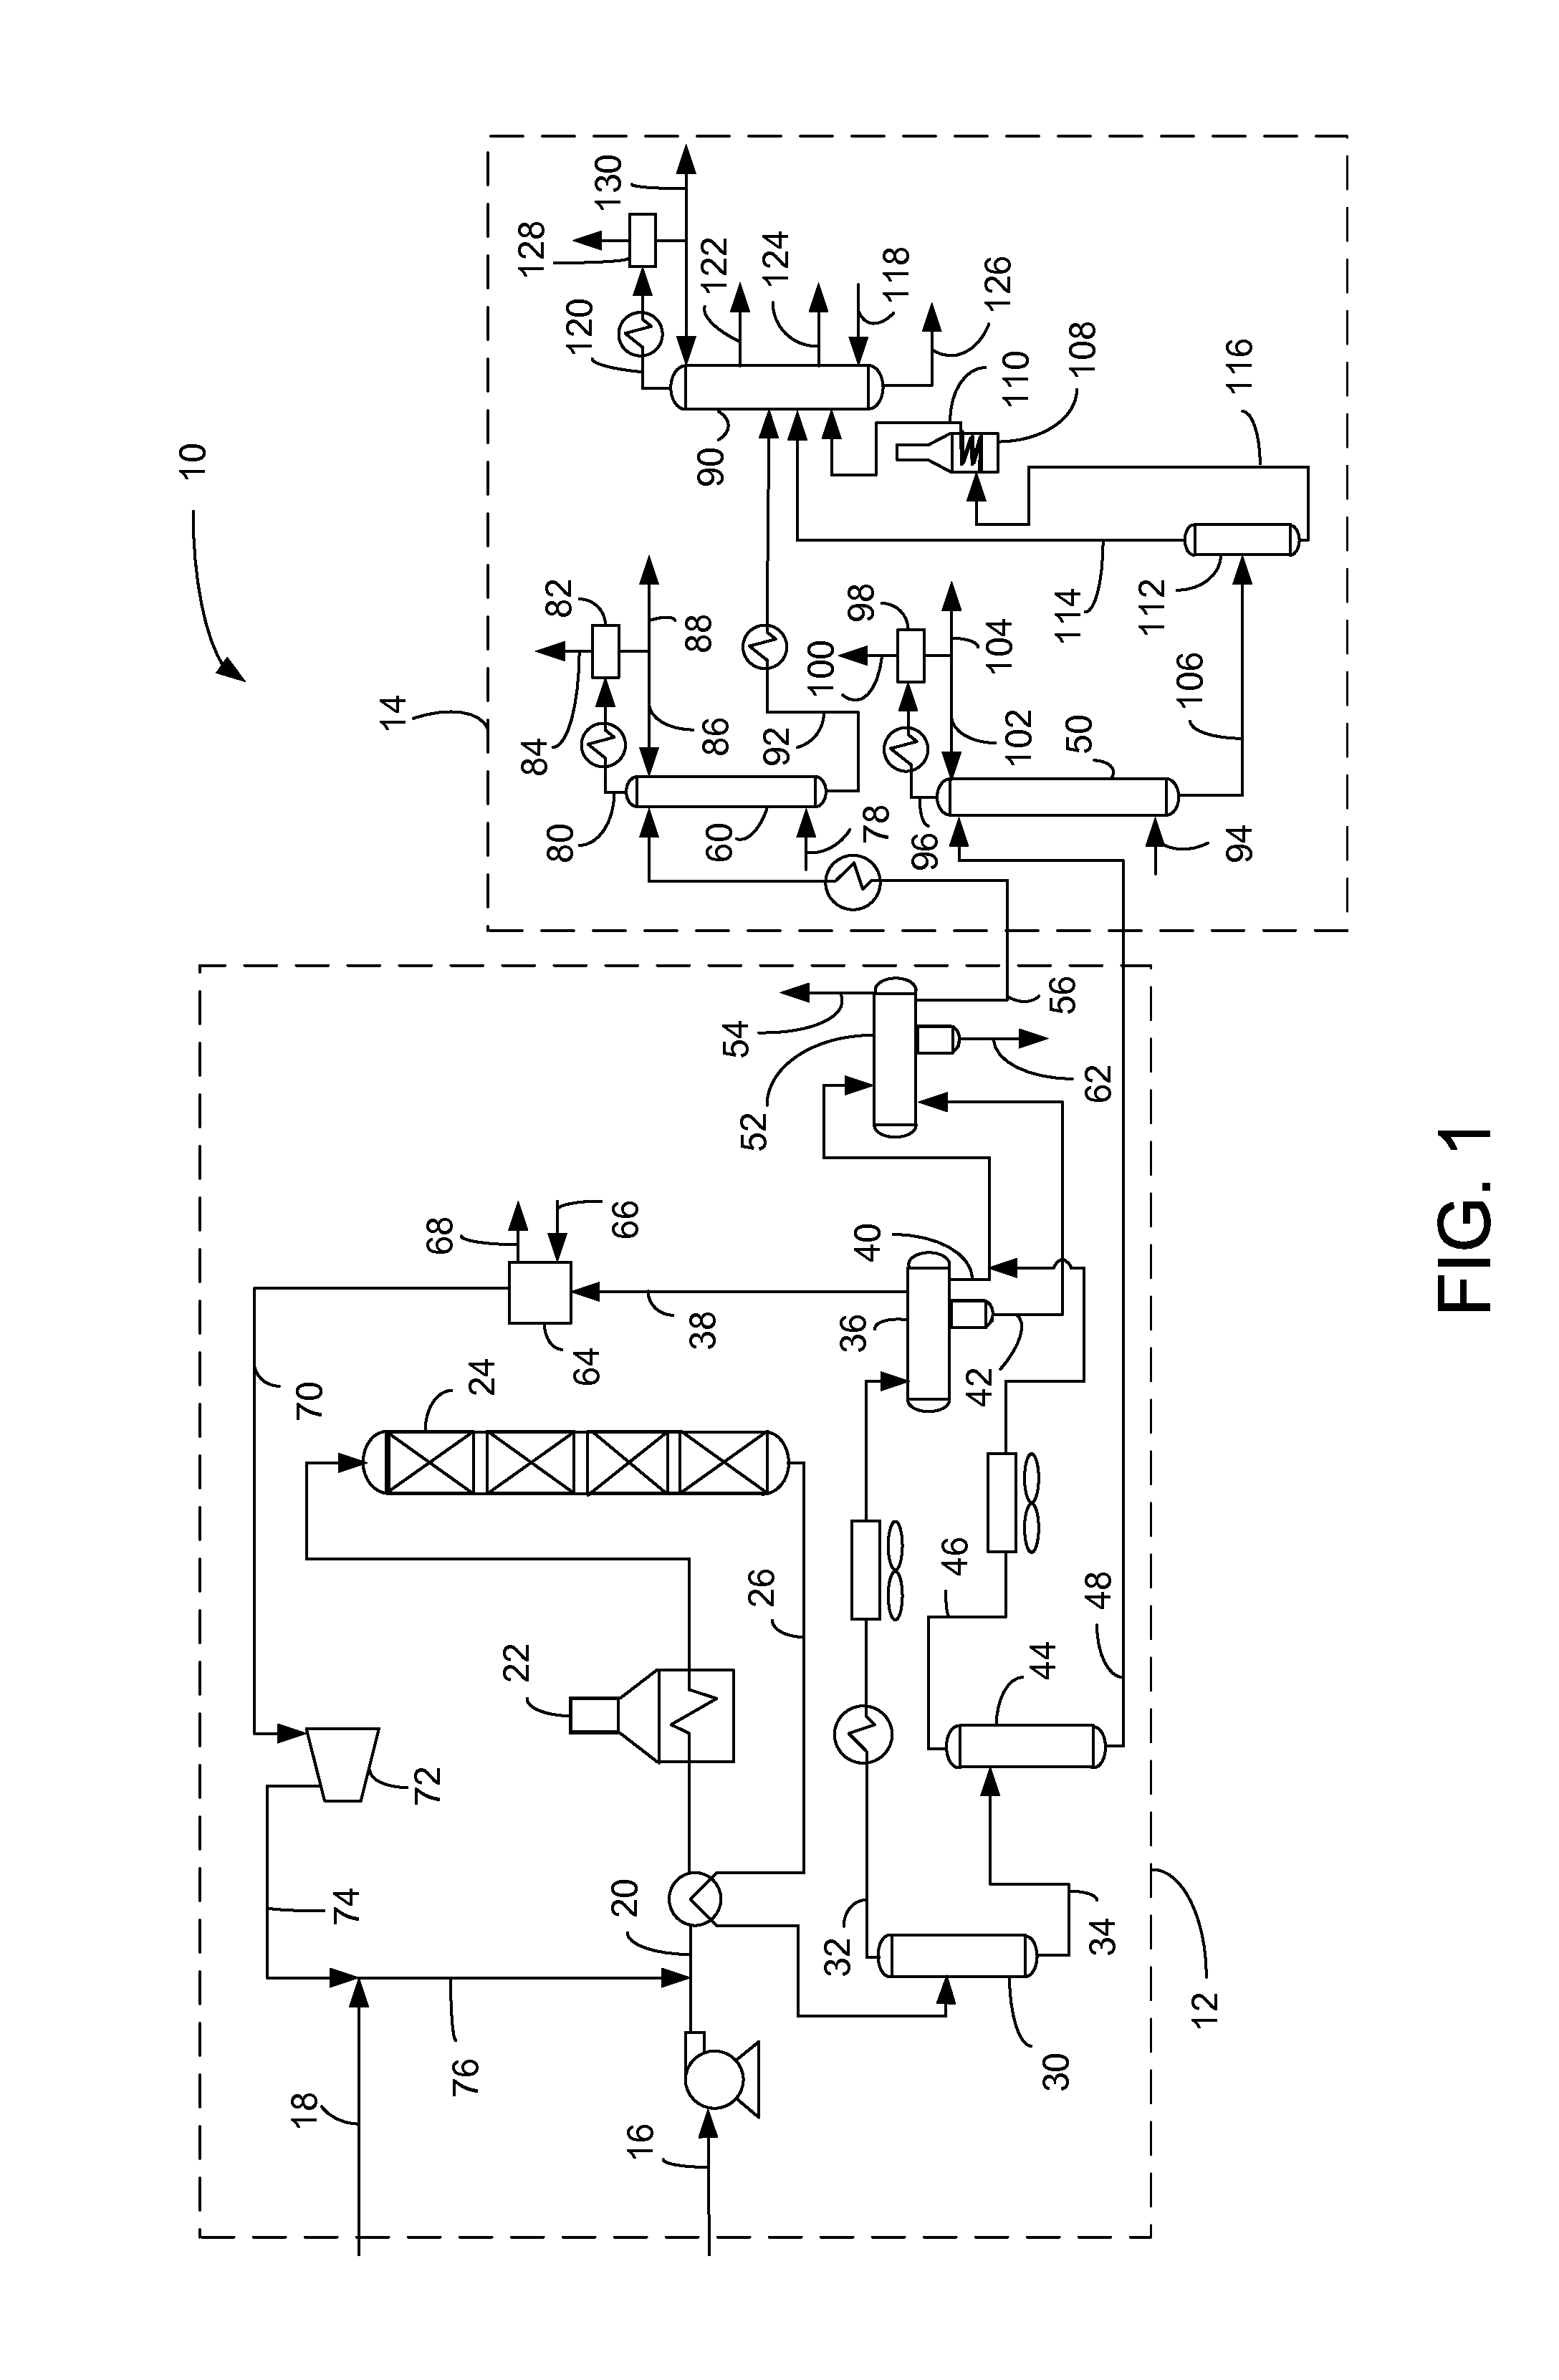 Apparatus for recovering hydroprocessed hydrocarbons with two strippers in one vessel